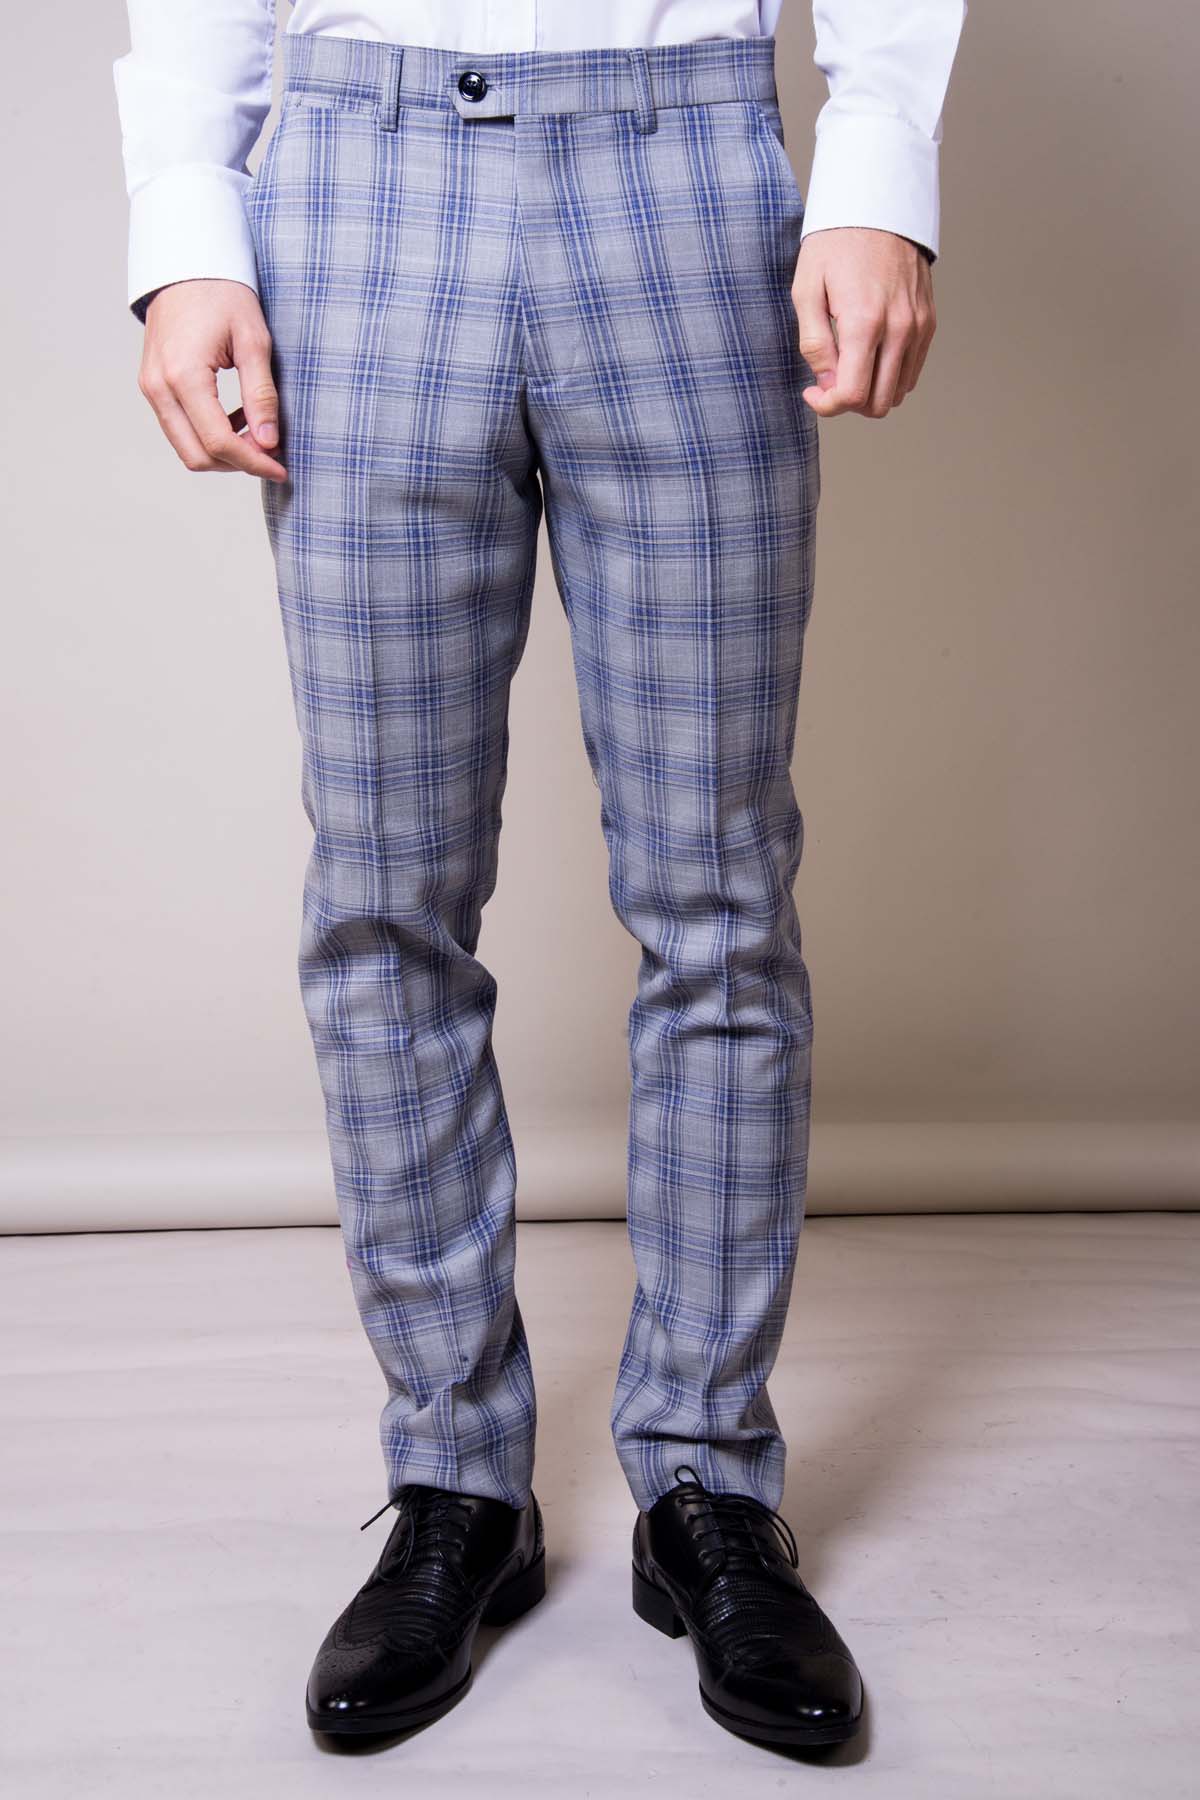 Marc darcy Jack Grey Checked Trousers